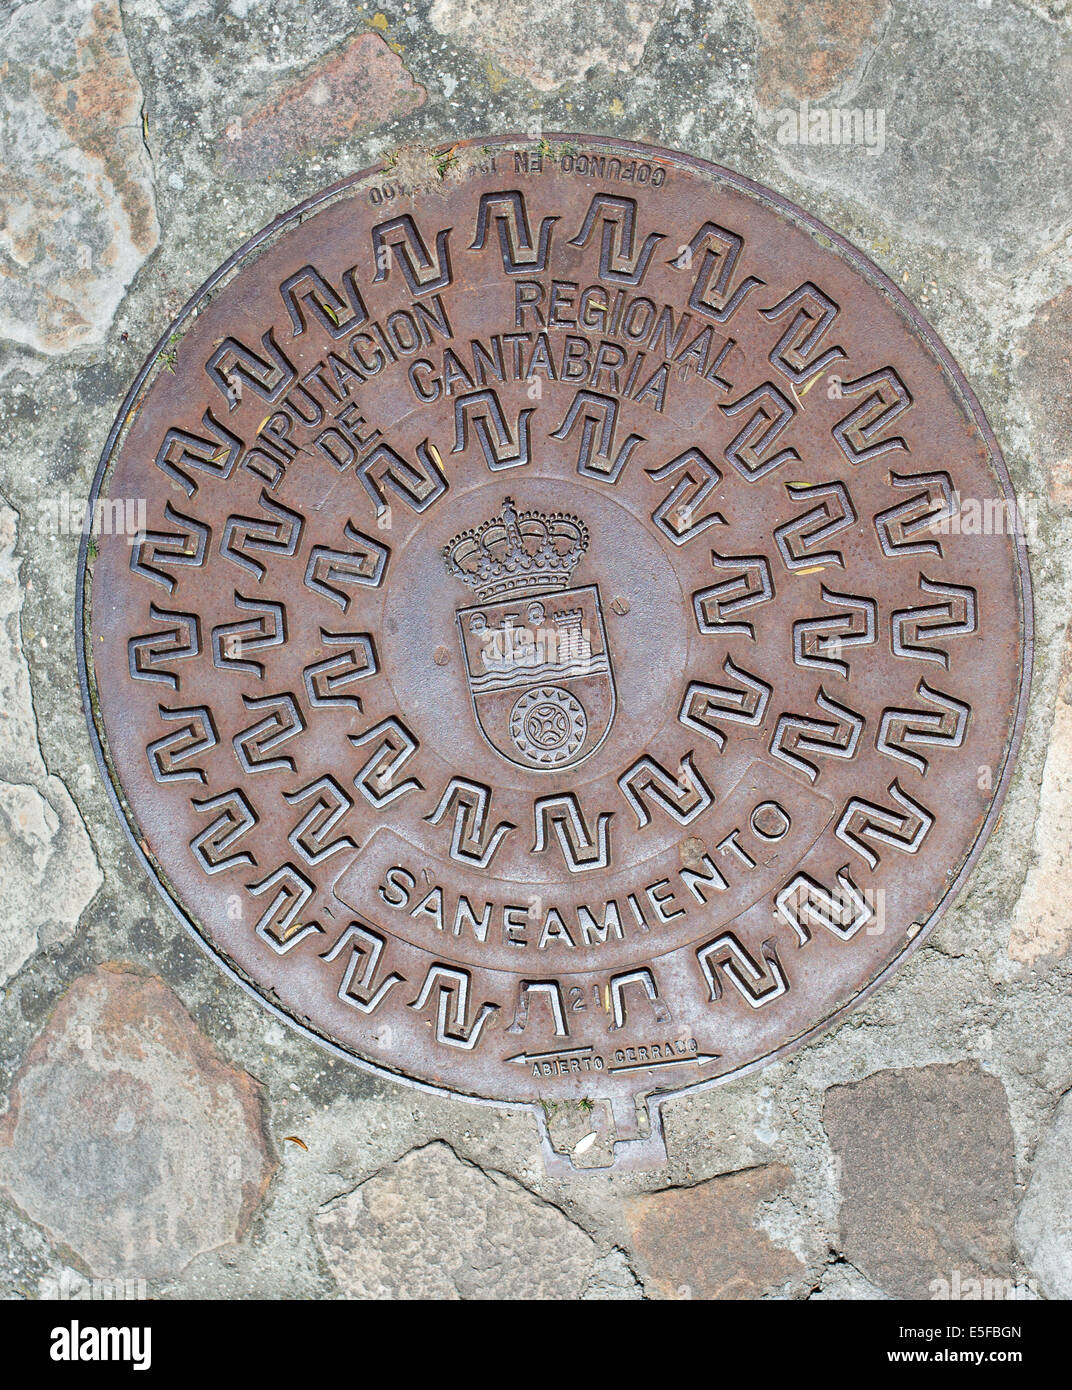 Cast iron manhole cover with Cantabrian coat of arms, Cantabria, Northern  Spain, Europe Stock Photo